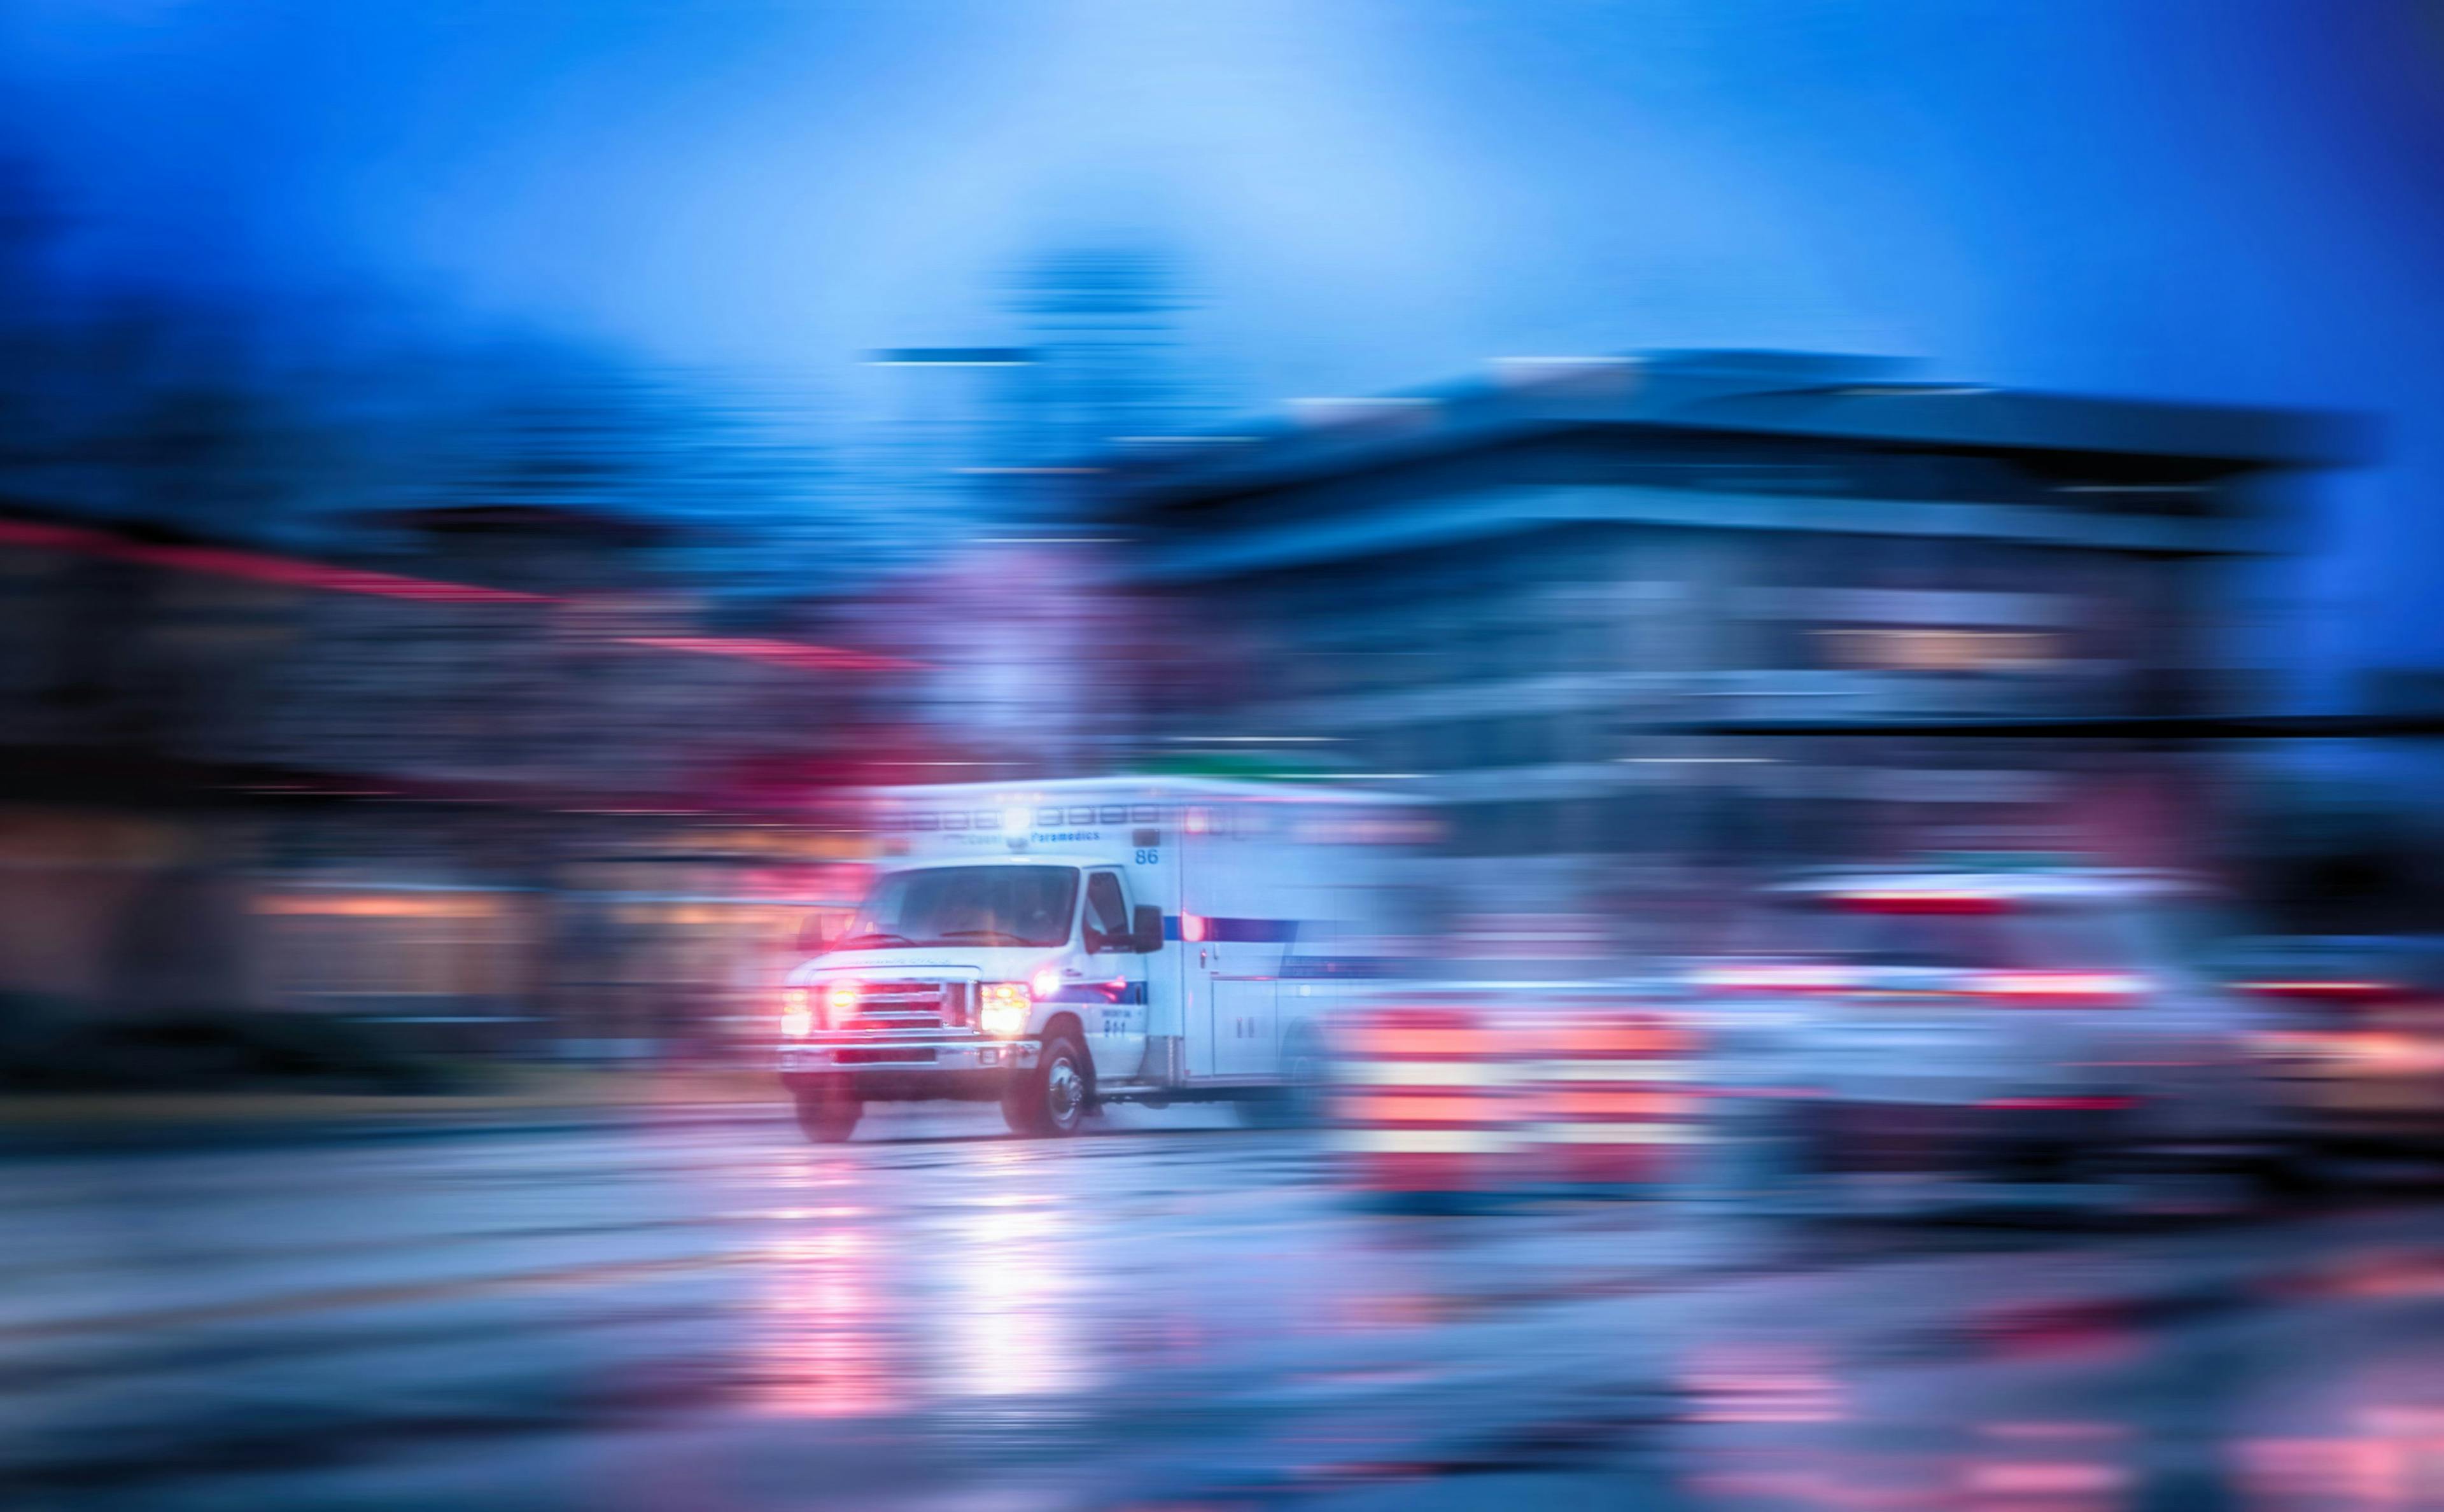 COVID-19 Stay-At-Home Orders Increased EMS Utilization in United States